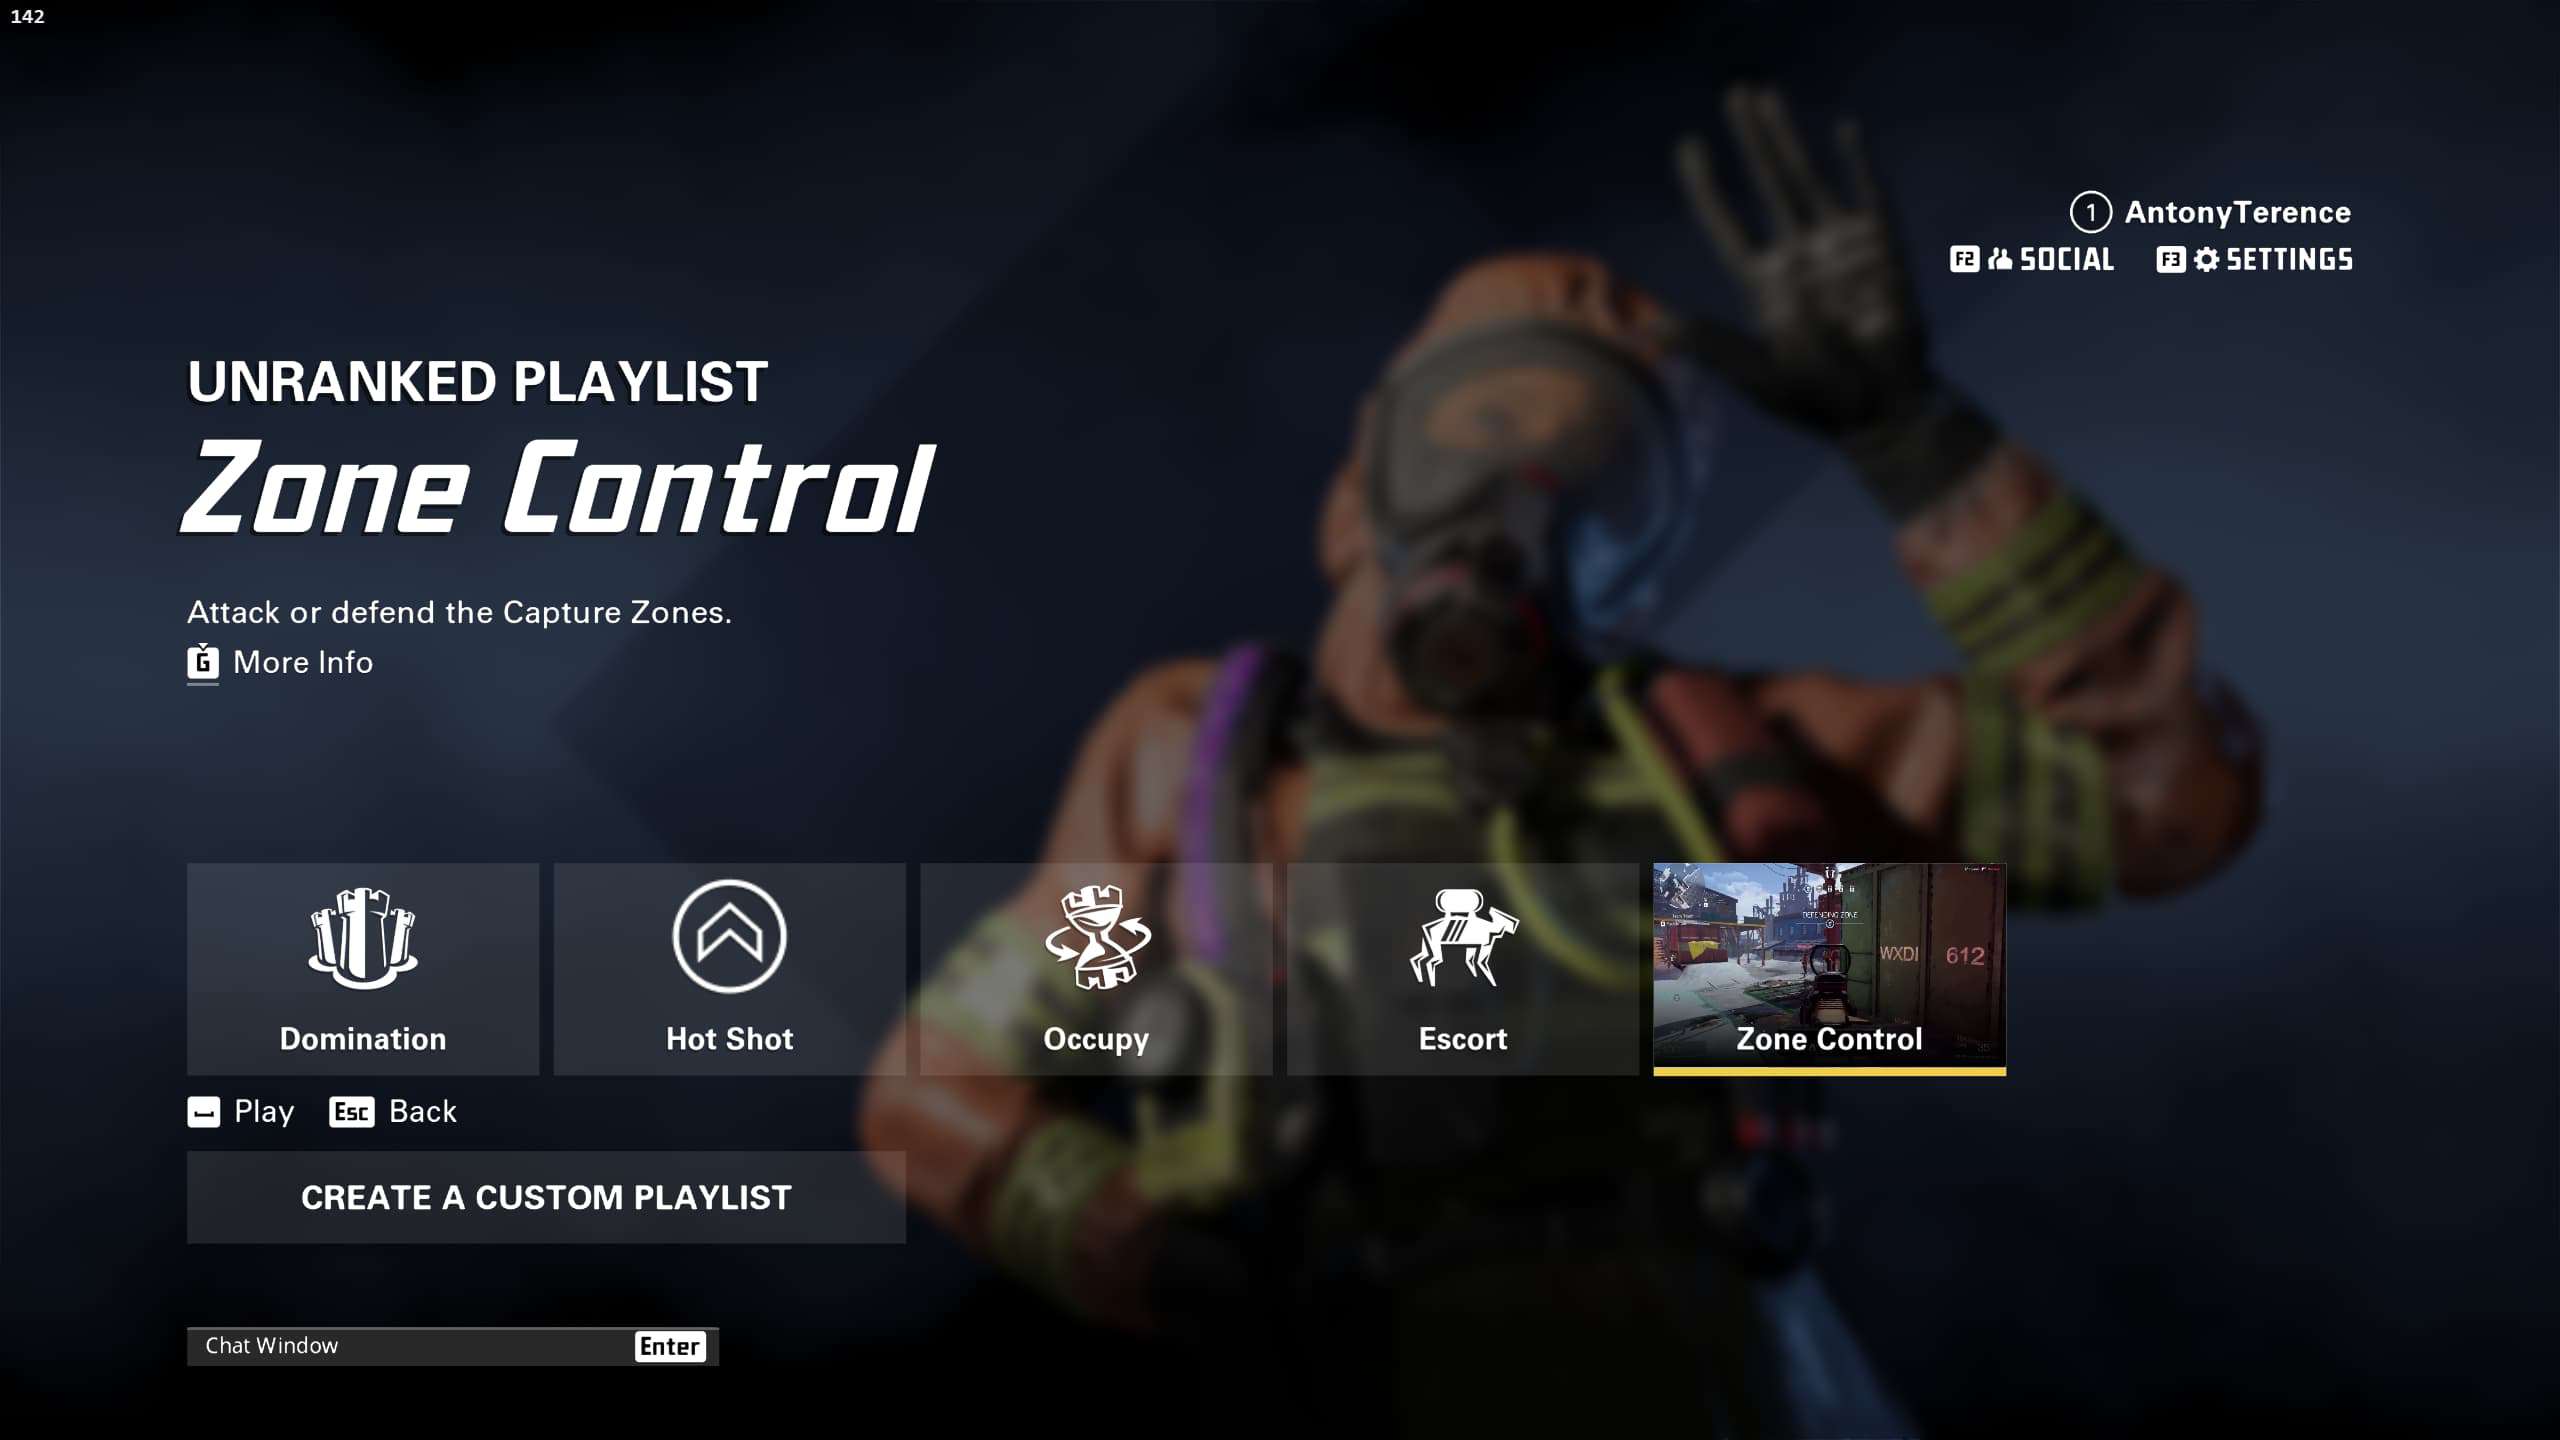 Video game menu screen for "Zone Control" mode in an unranked XDefiant playlist. Options include Domination, Hot Shot, Occupy, and Escort. 